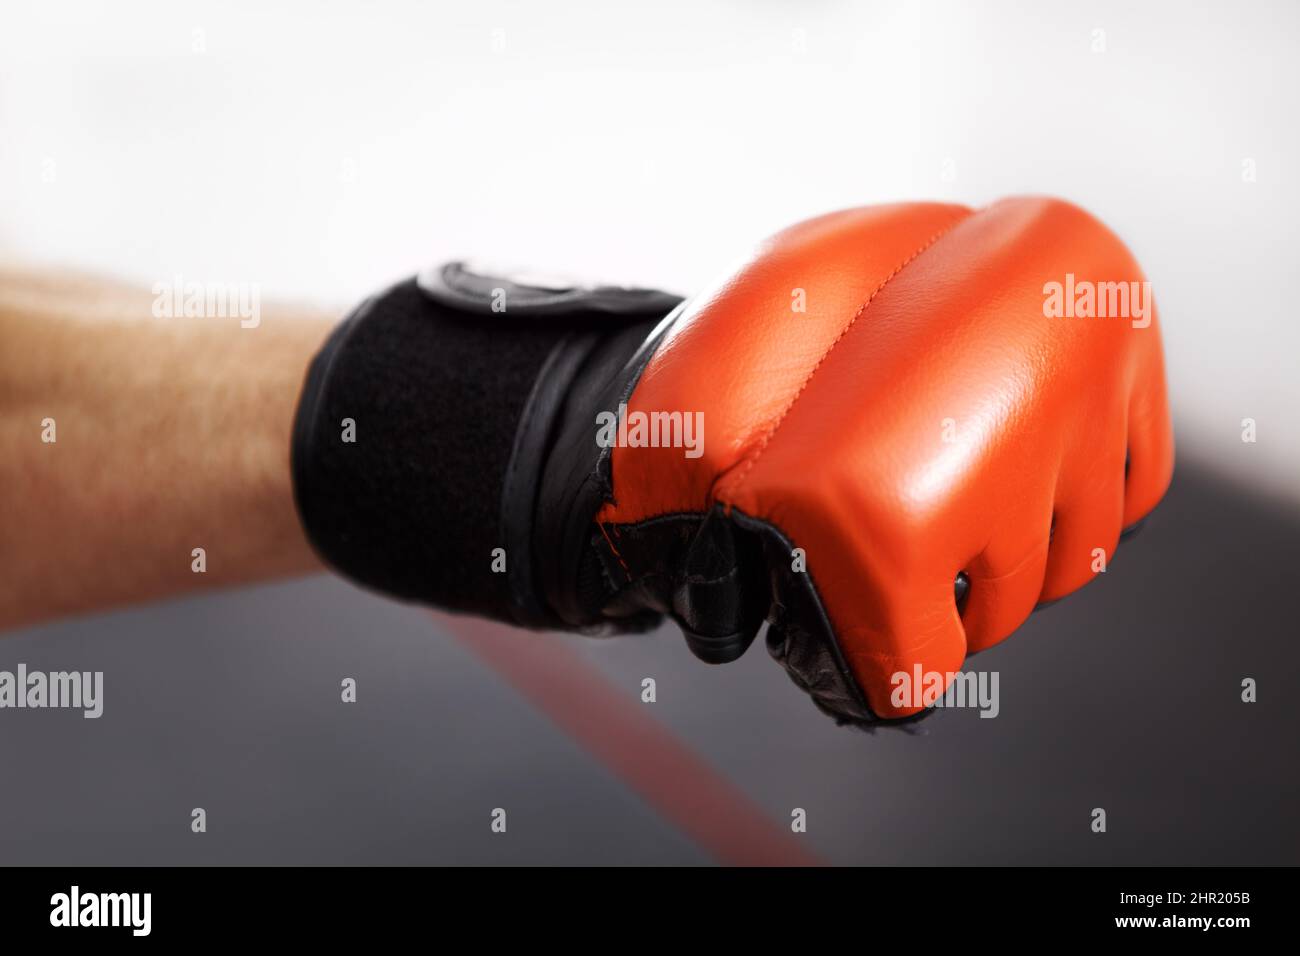 Give it all youve got. Cropped shot of a martial artists fist in a red kickboxing glove. Stock Photo